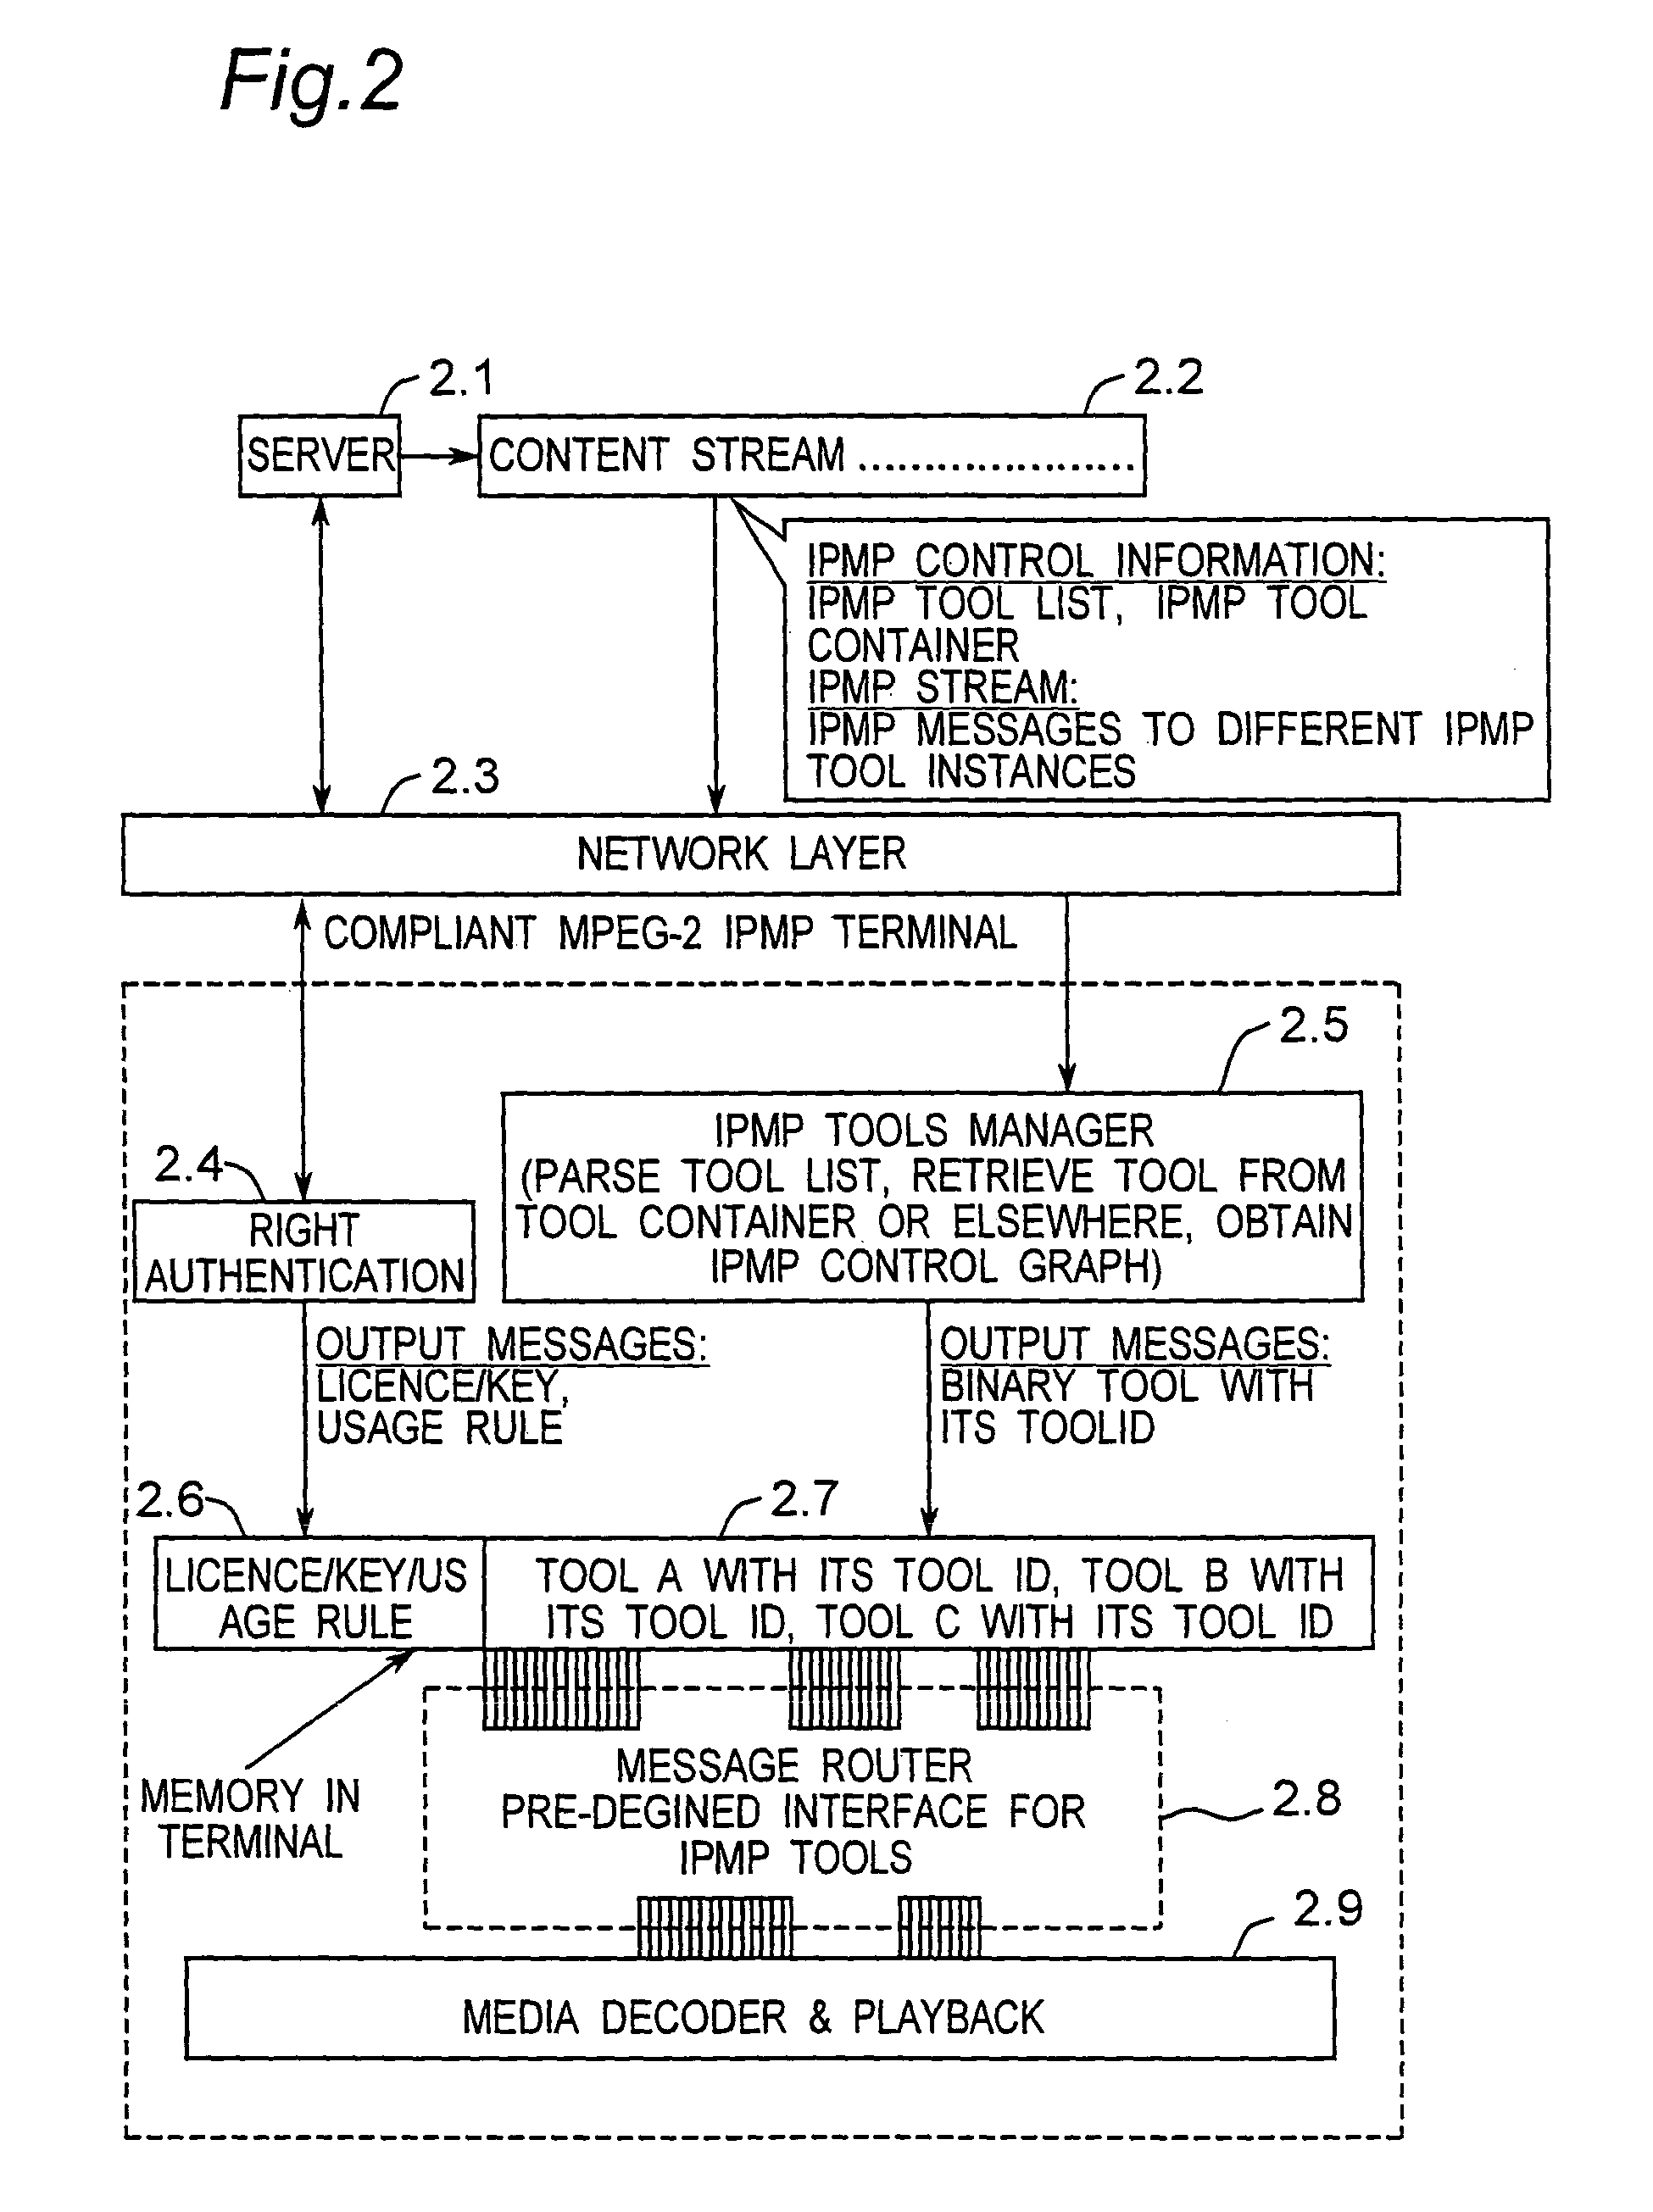 Apparatus of a flexible and common IPMP system for MPEG-2 content distribution and protection